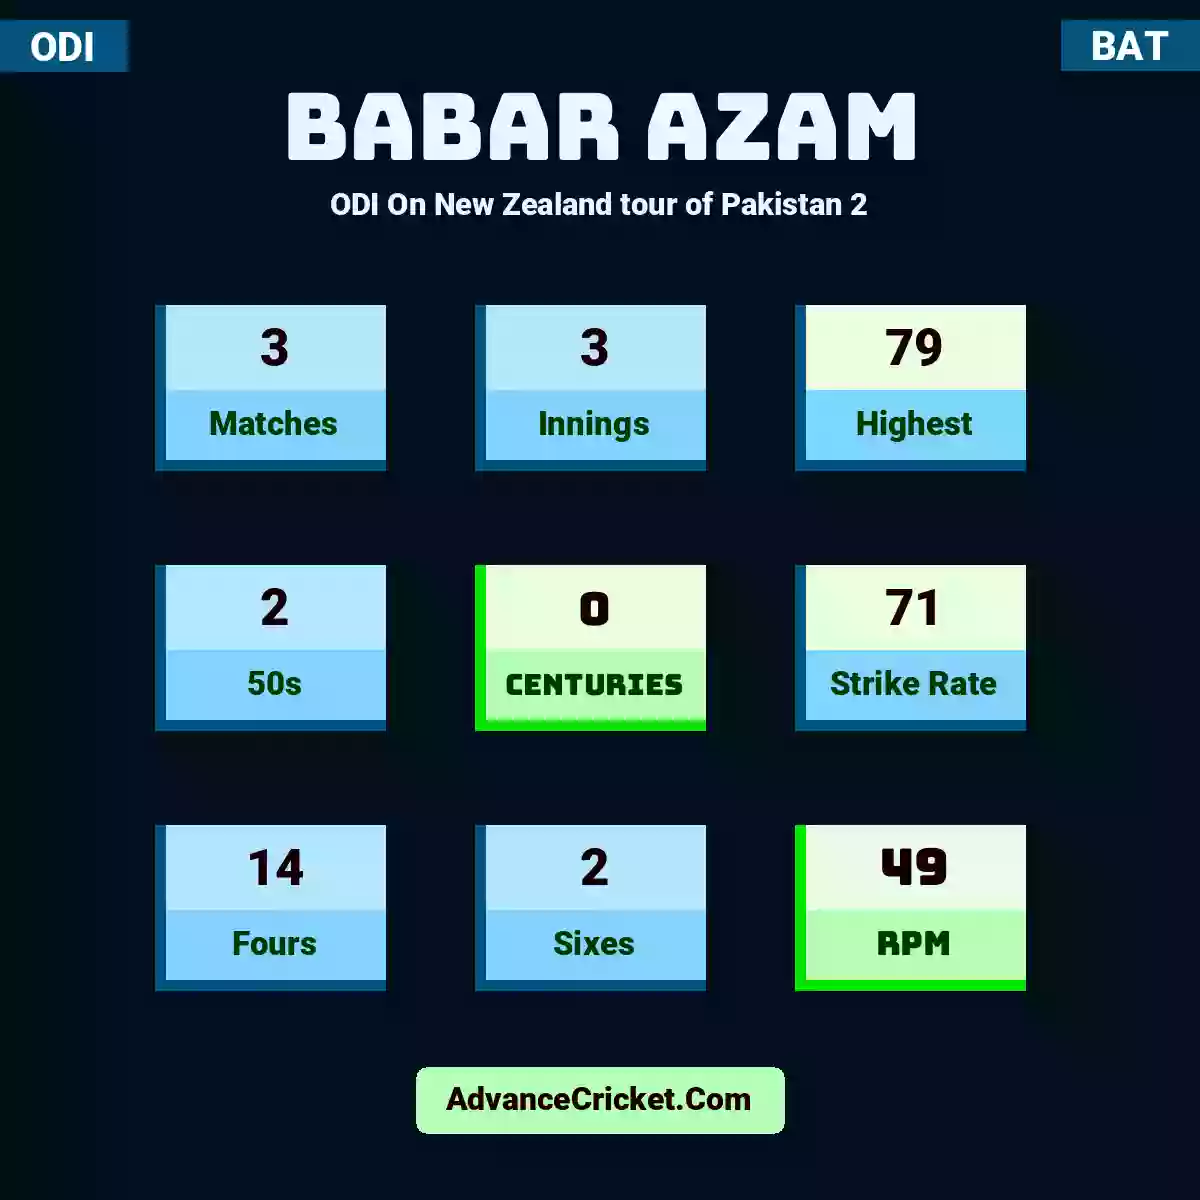 Babar Azam ODI  On New Zealand tour of Pakistan 2, Babar Azam played 3 matches, scored 79 runs as highest, 2 half-centuries, and 0 centuries, with a strike rate of 71. B.Azam hit 14 fours and 2 sixes, with an RPM of 49.